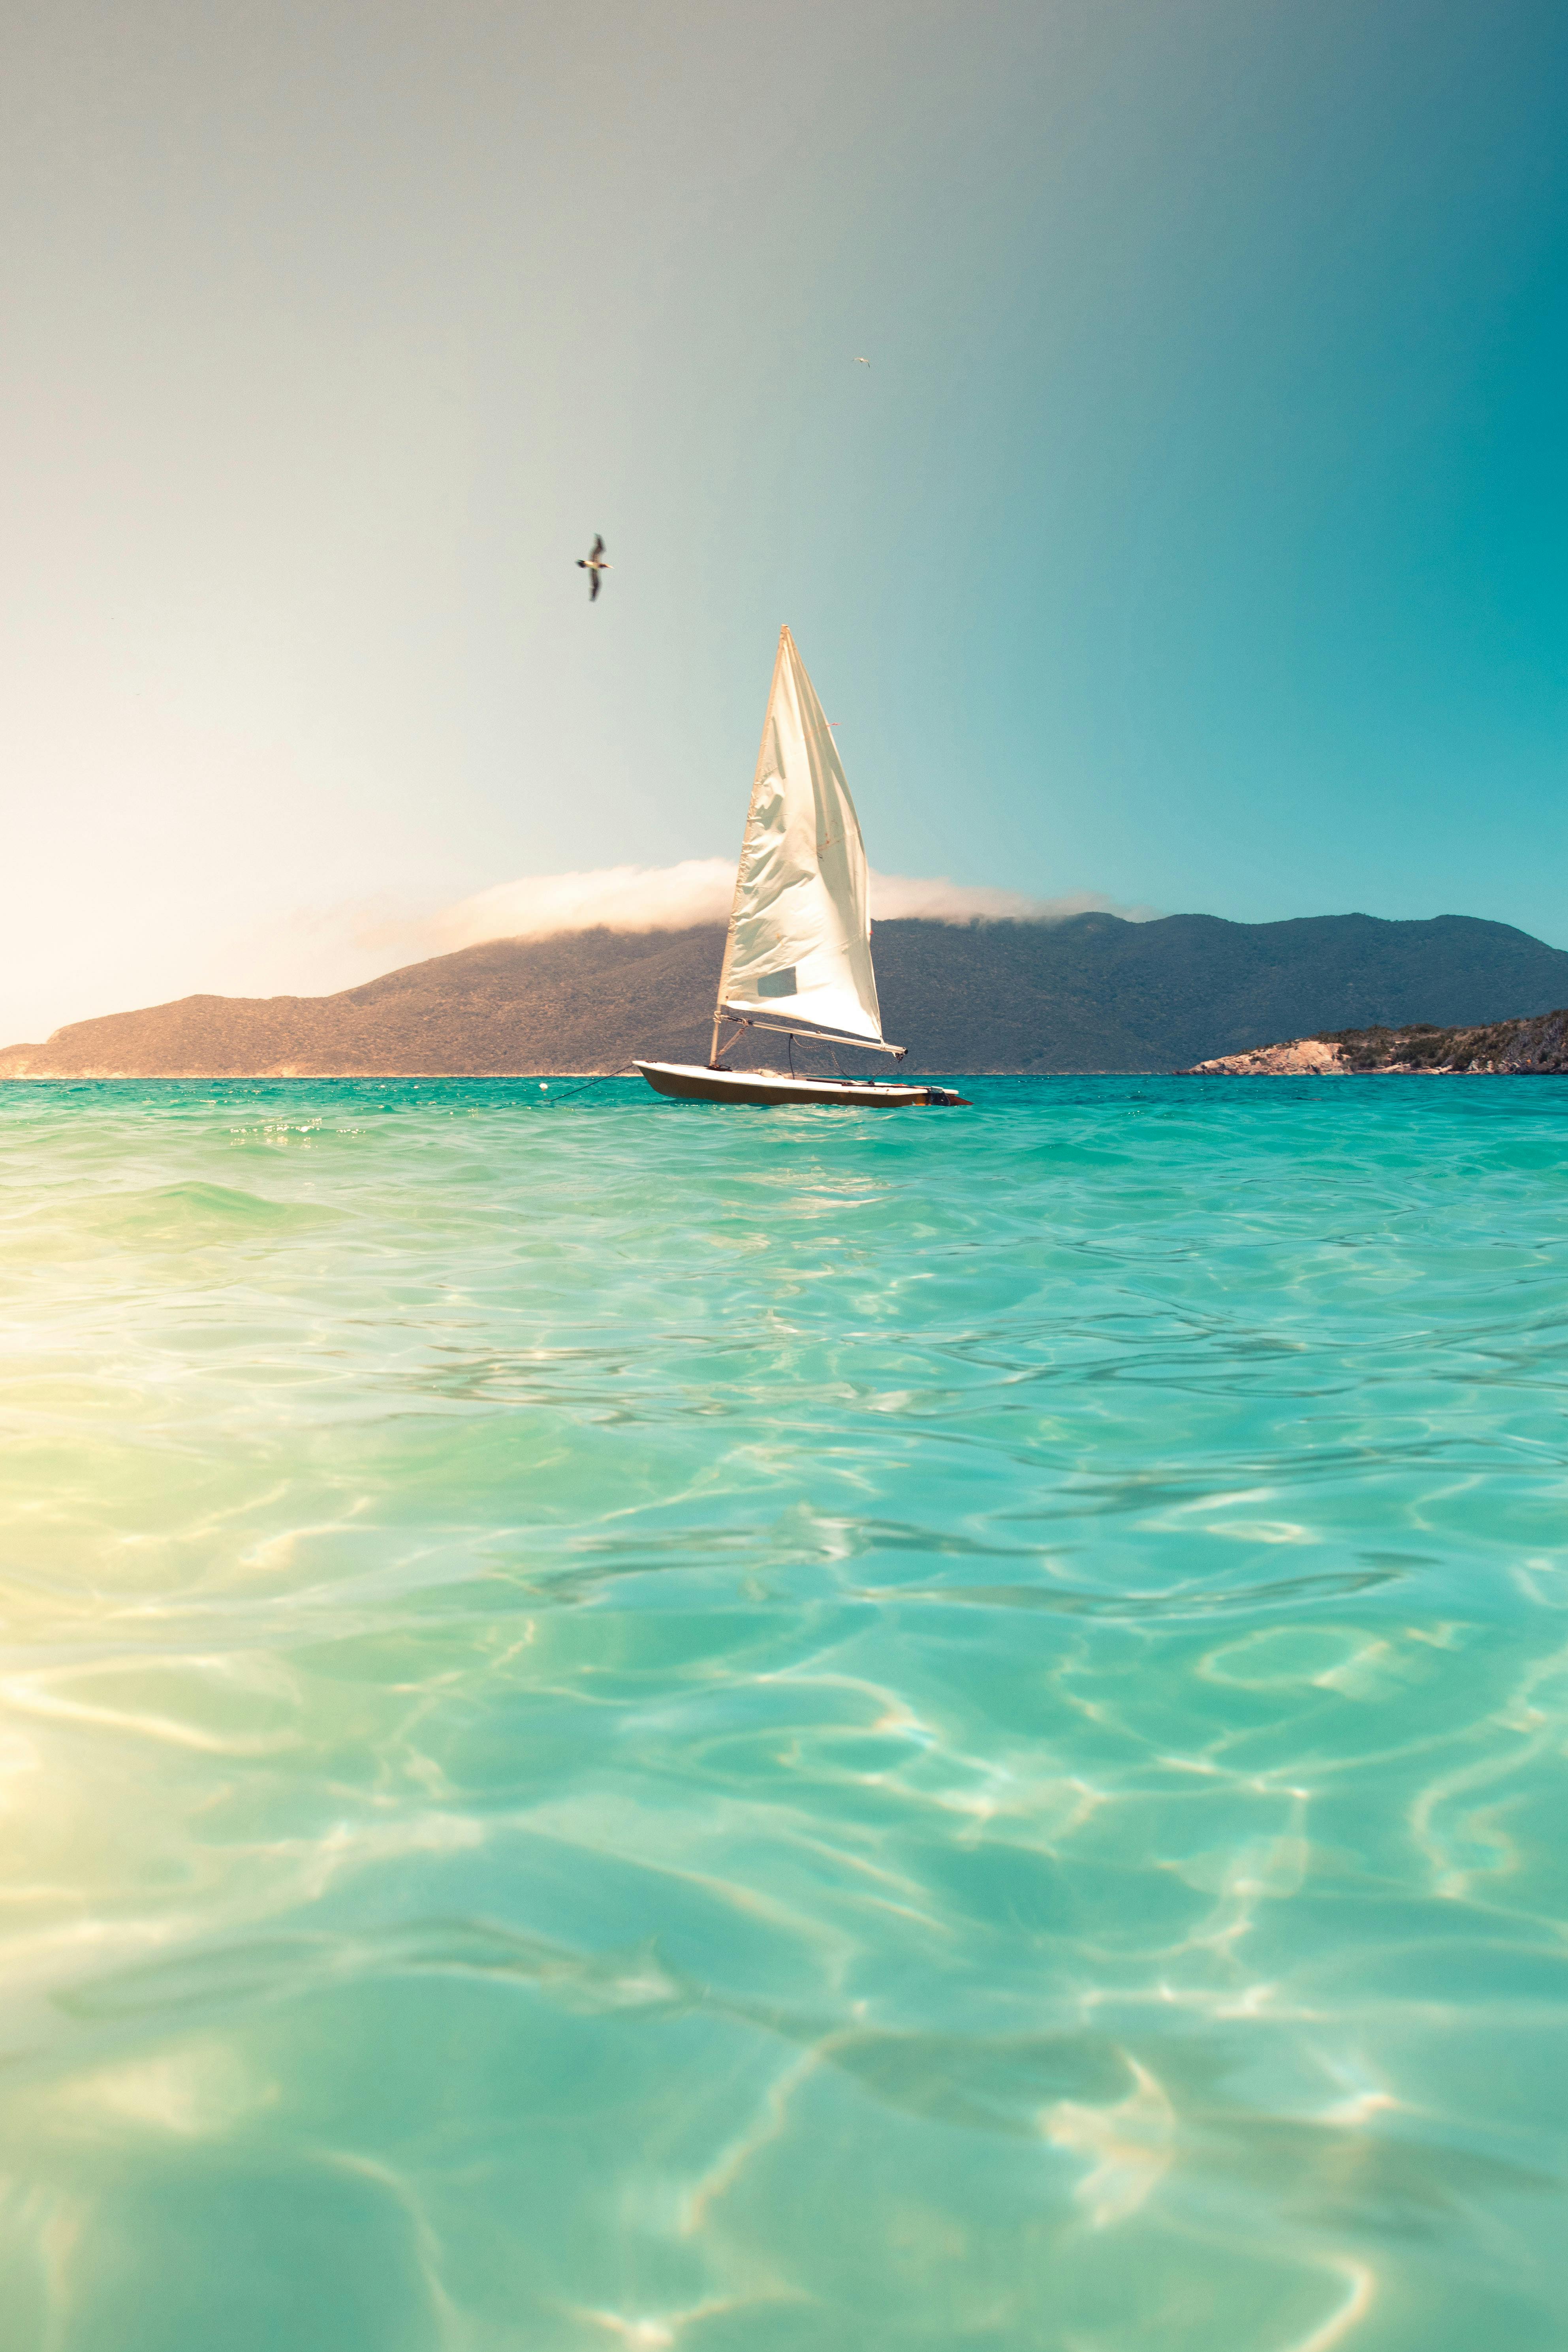 Paradise Photos, Download The BEST Free Paradise Stock Photos & HD Images